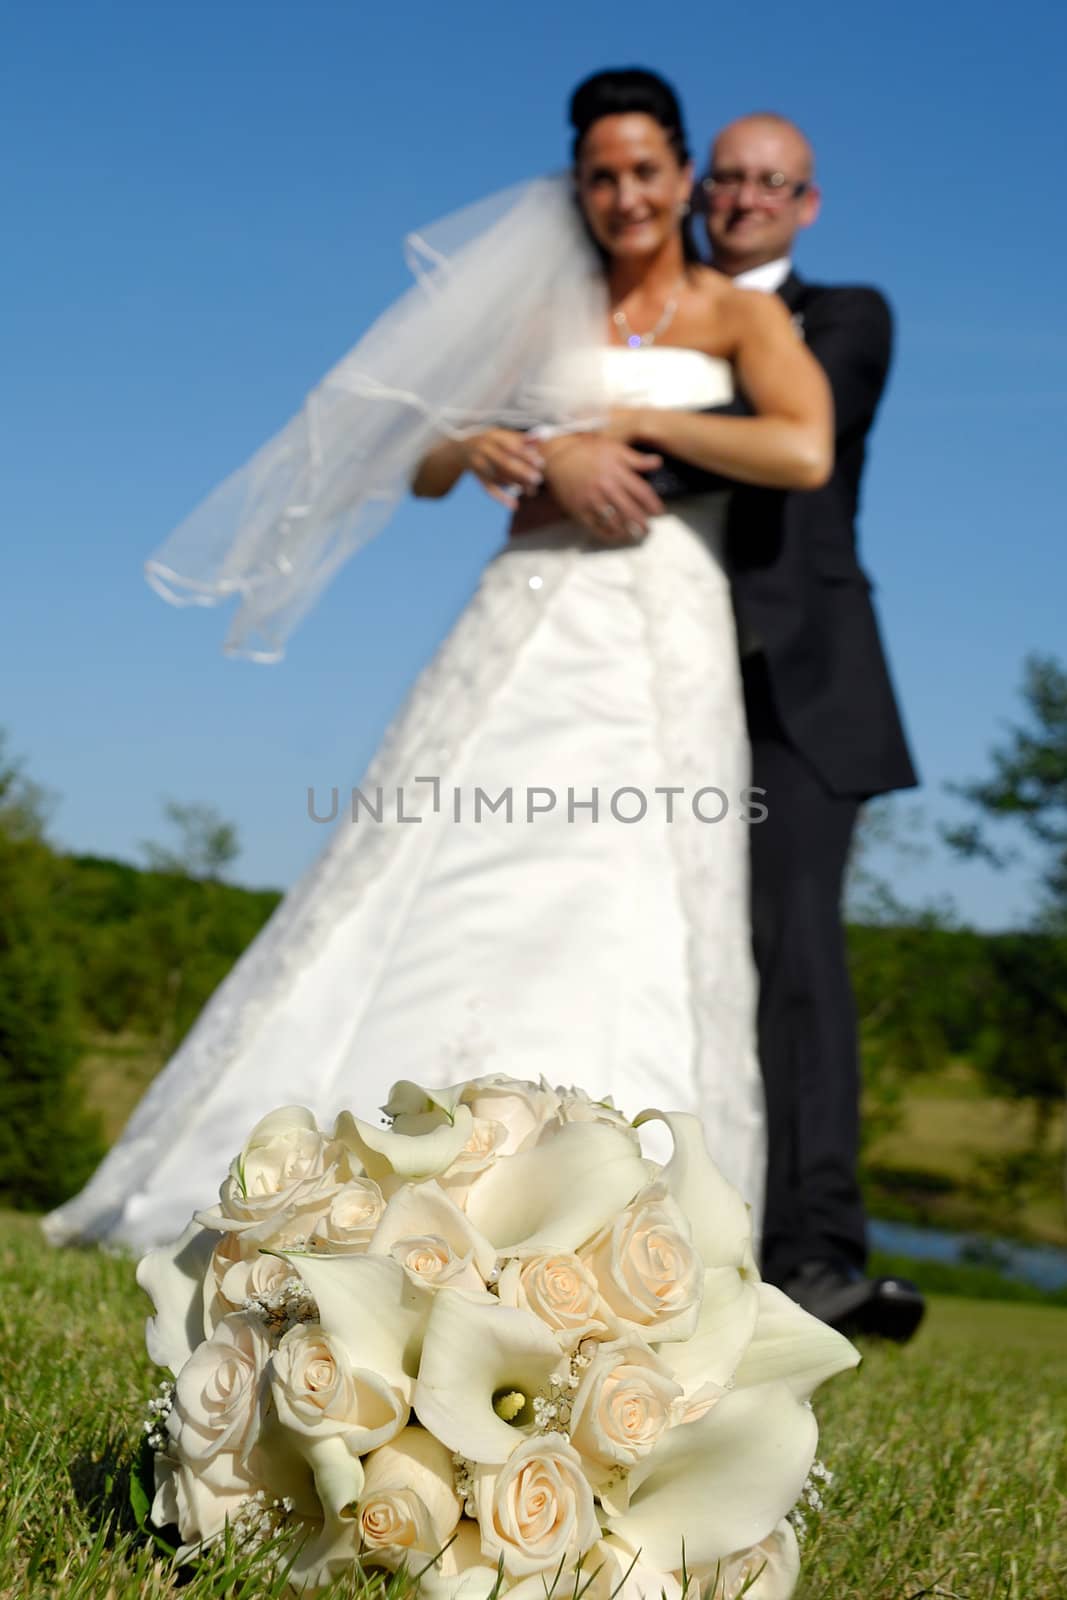 Wedding bouquet in focus and couple in blur